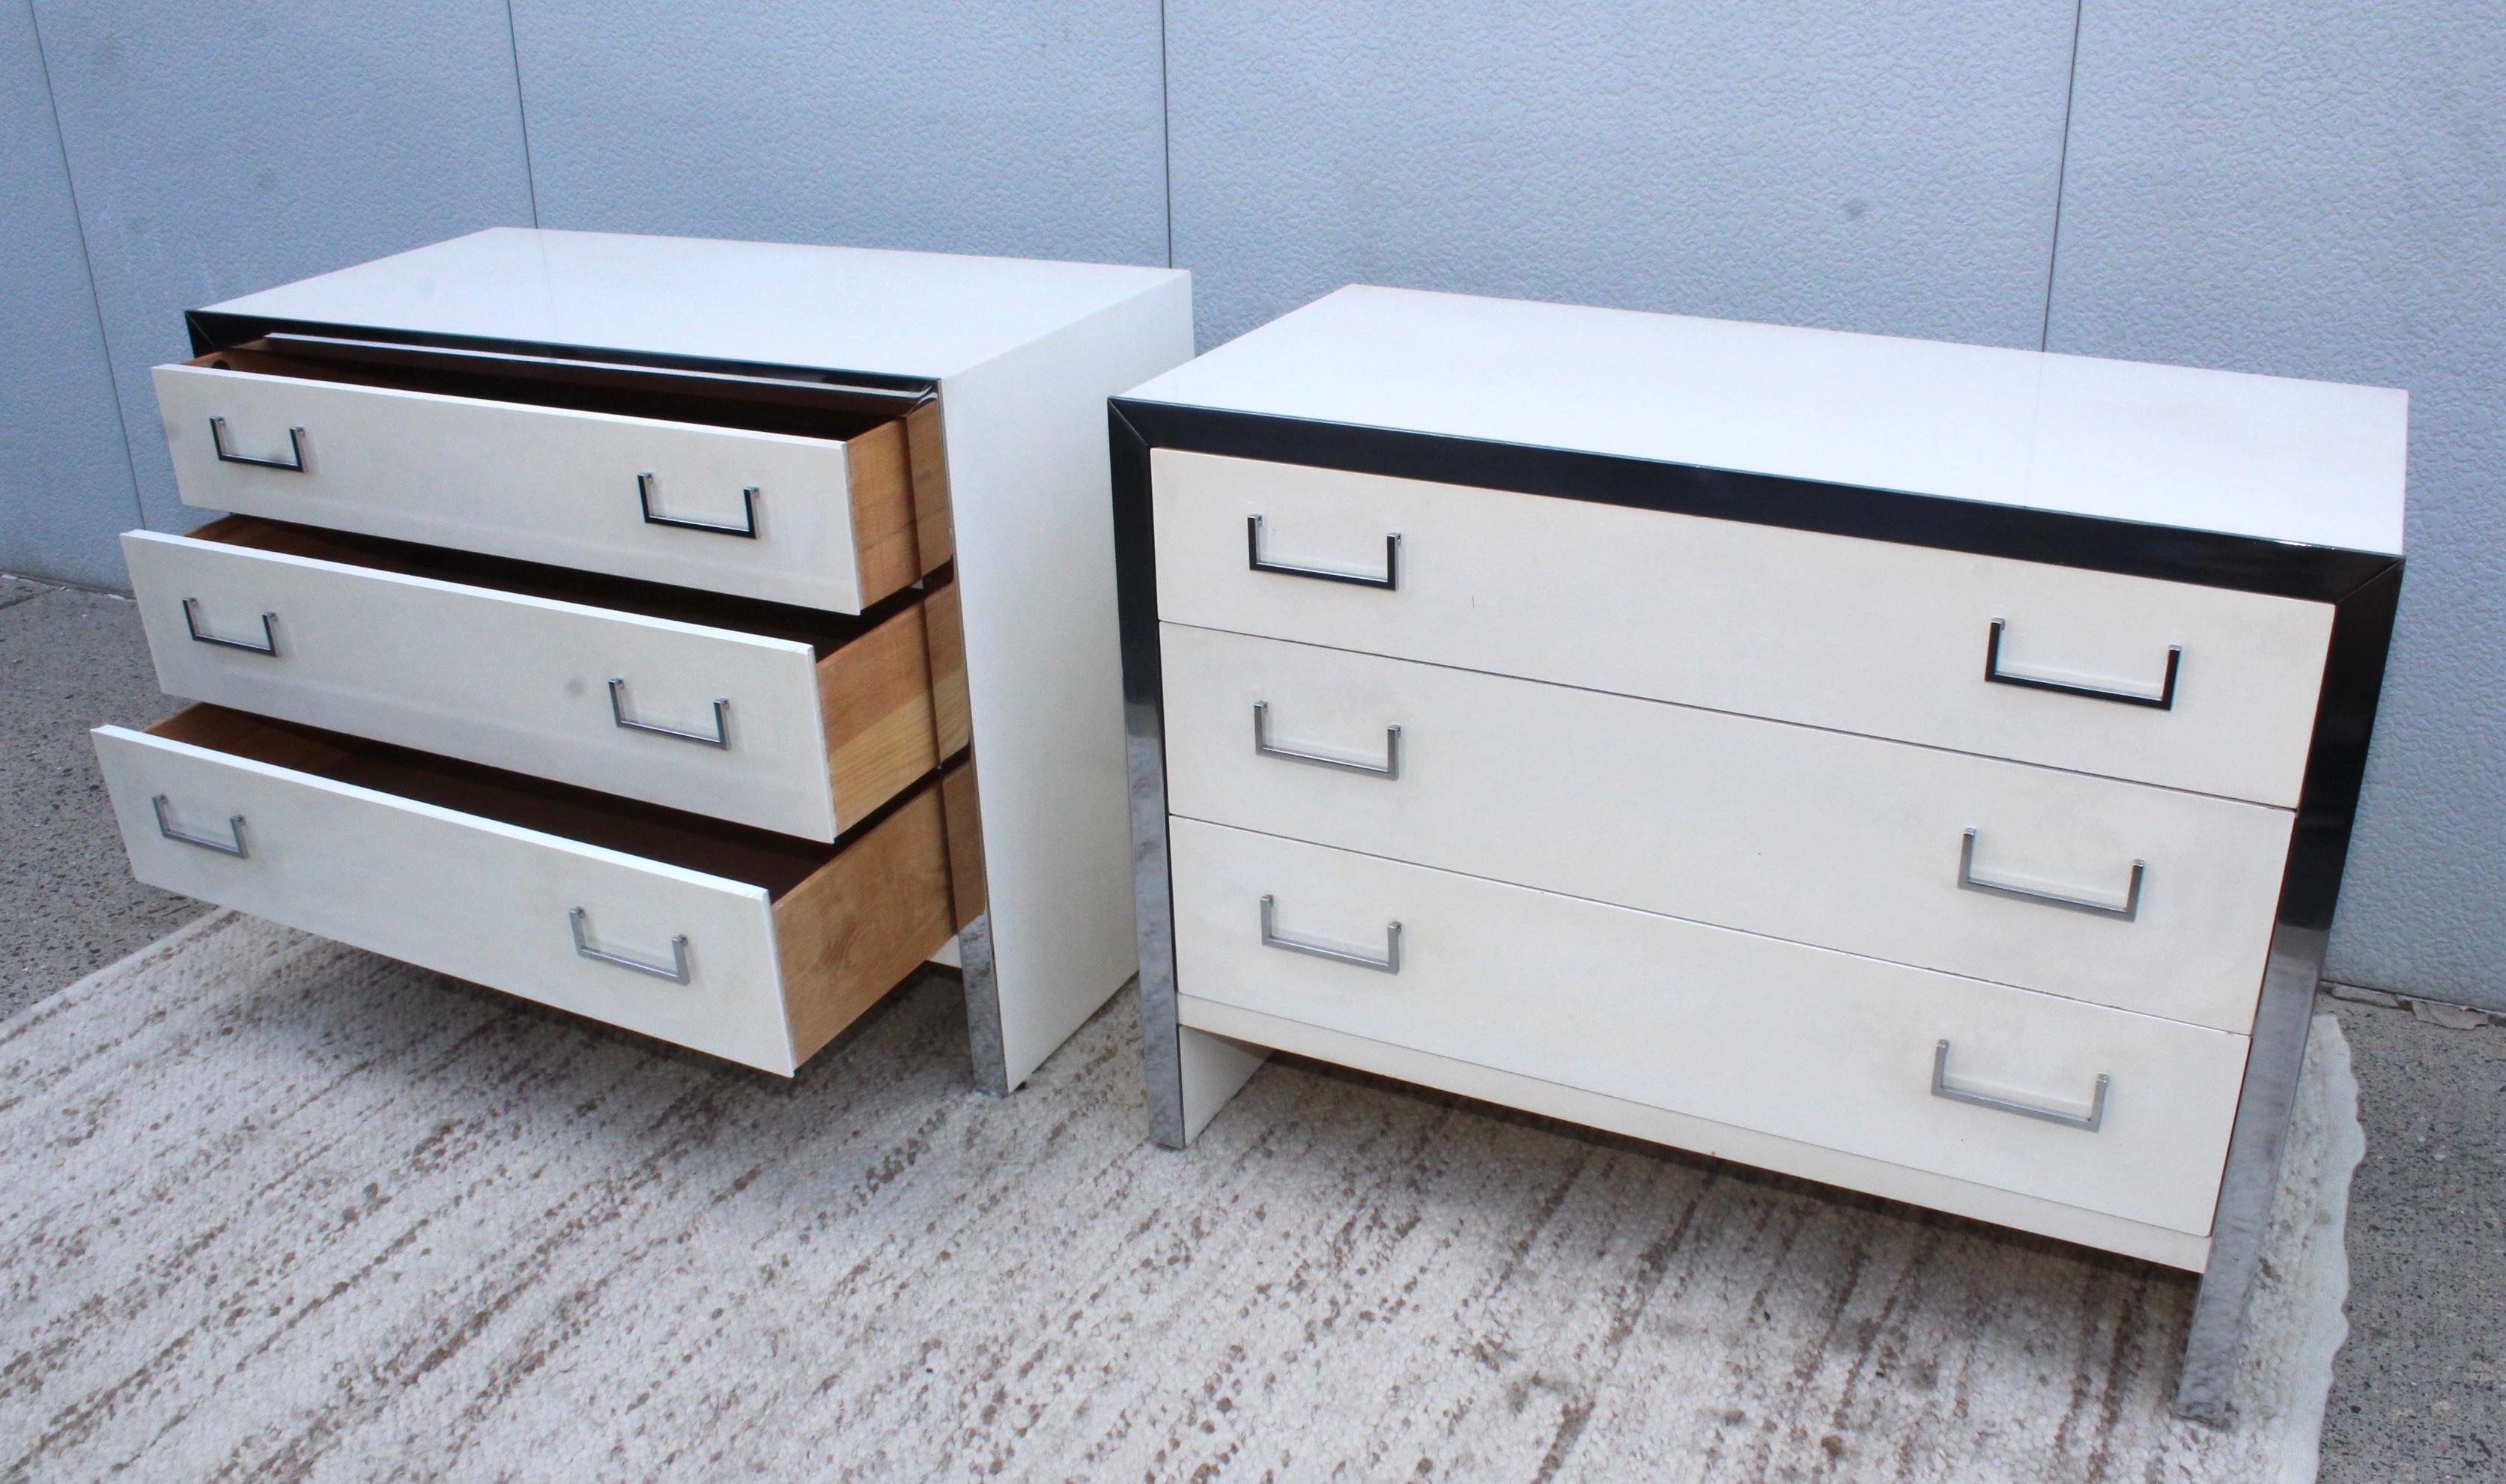 1970s Chrome and Lacquer Mid-Century Modern Dressers by John Stuart 1